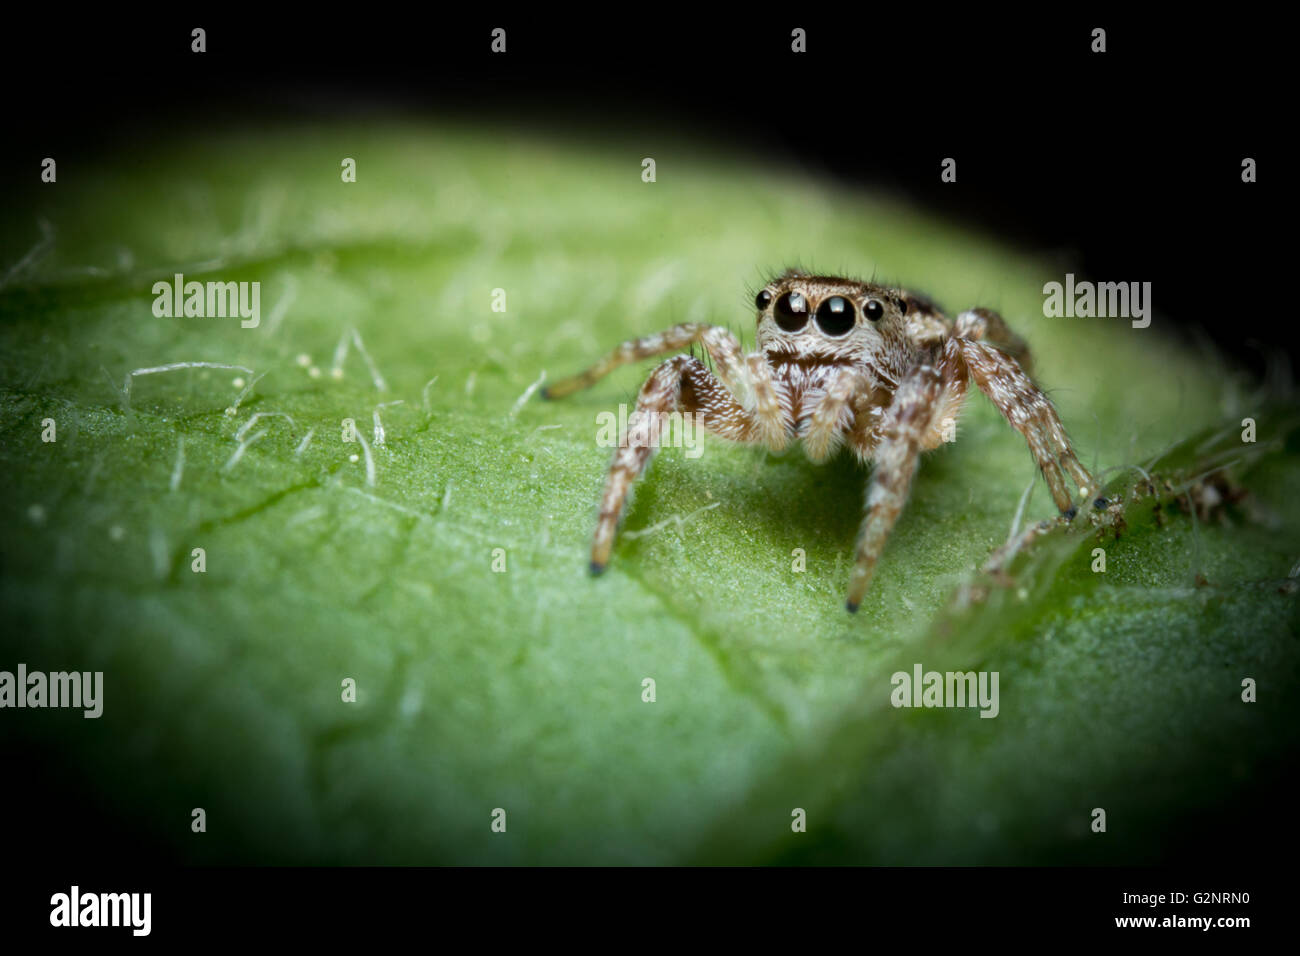 Super macro close up jumping spider on green leaf Stock Photo